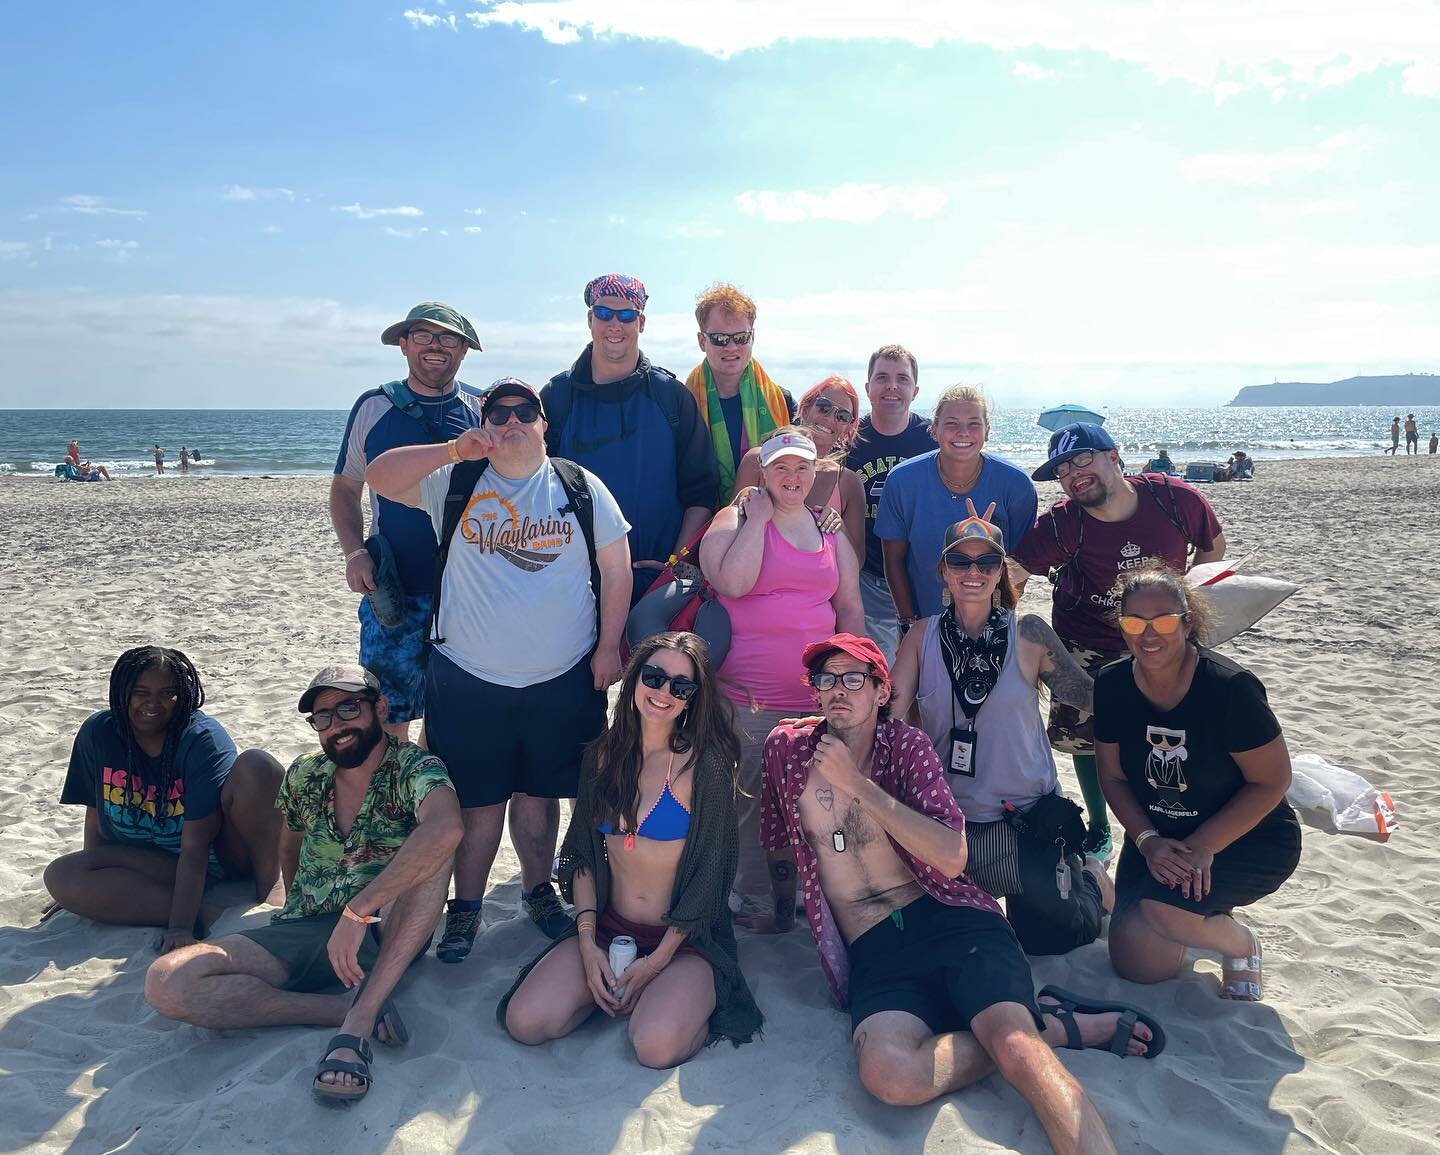 Friends forever, okay?

Image Description: The whole group of San Diego Wayfarers are standing on the sandy beach, smiling. The ocean is behind them, the sun is shining bright and the sky is blue with some clouds.